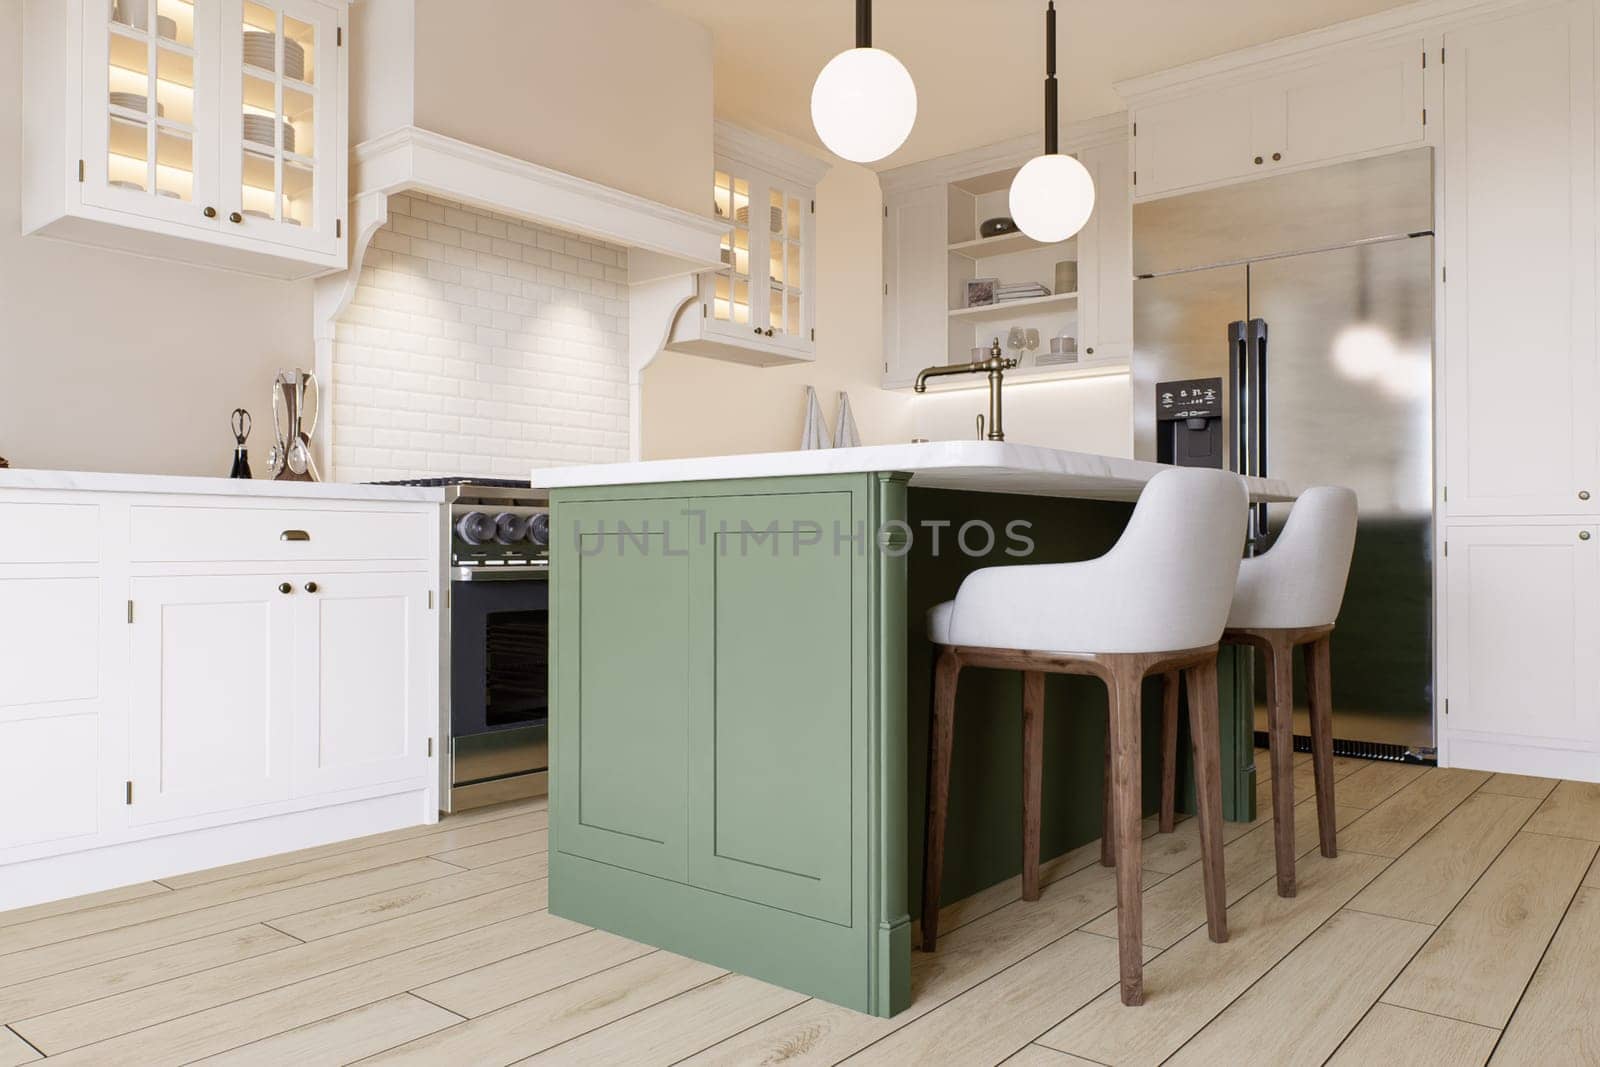 Bright kitchen in warm colors with a green island. Kitchen interior with household appliances and utensils. 3D rendering